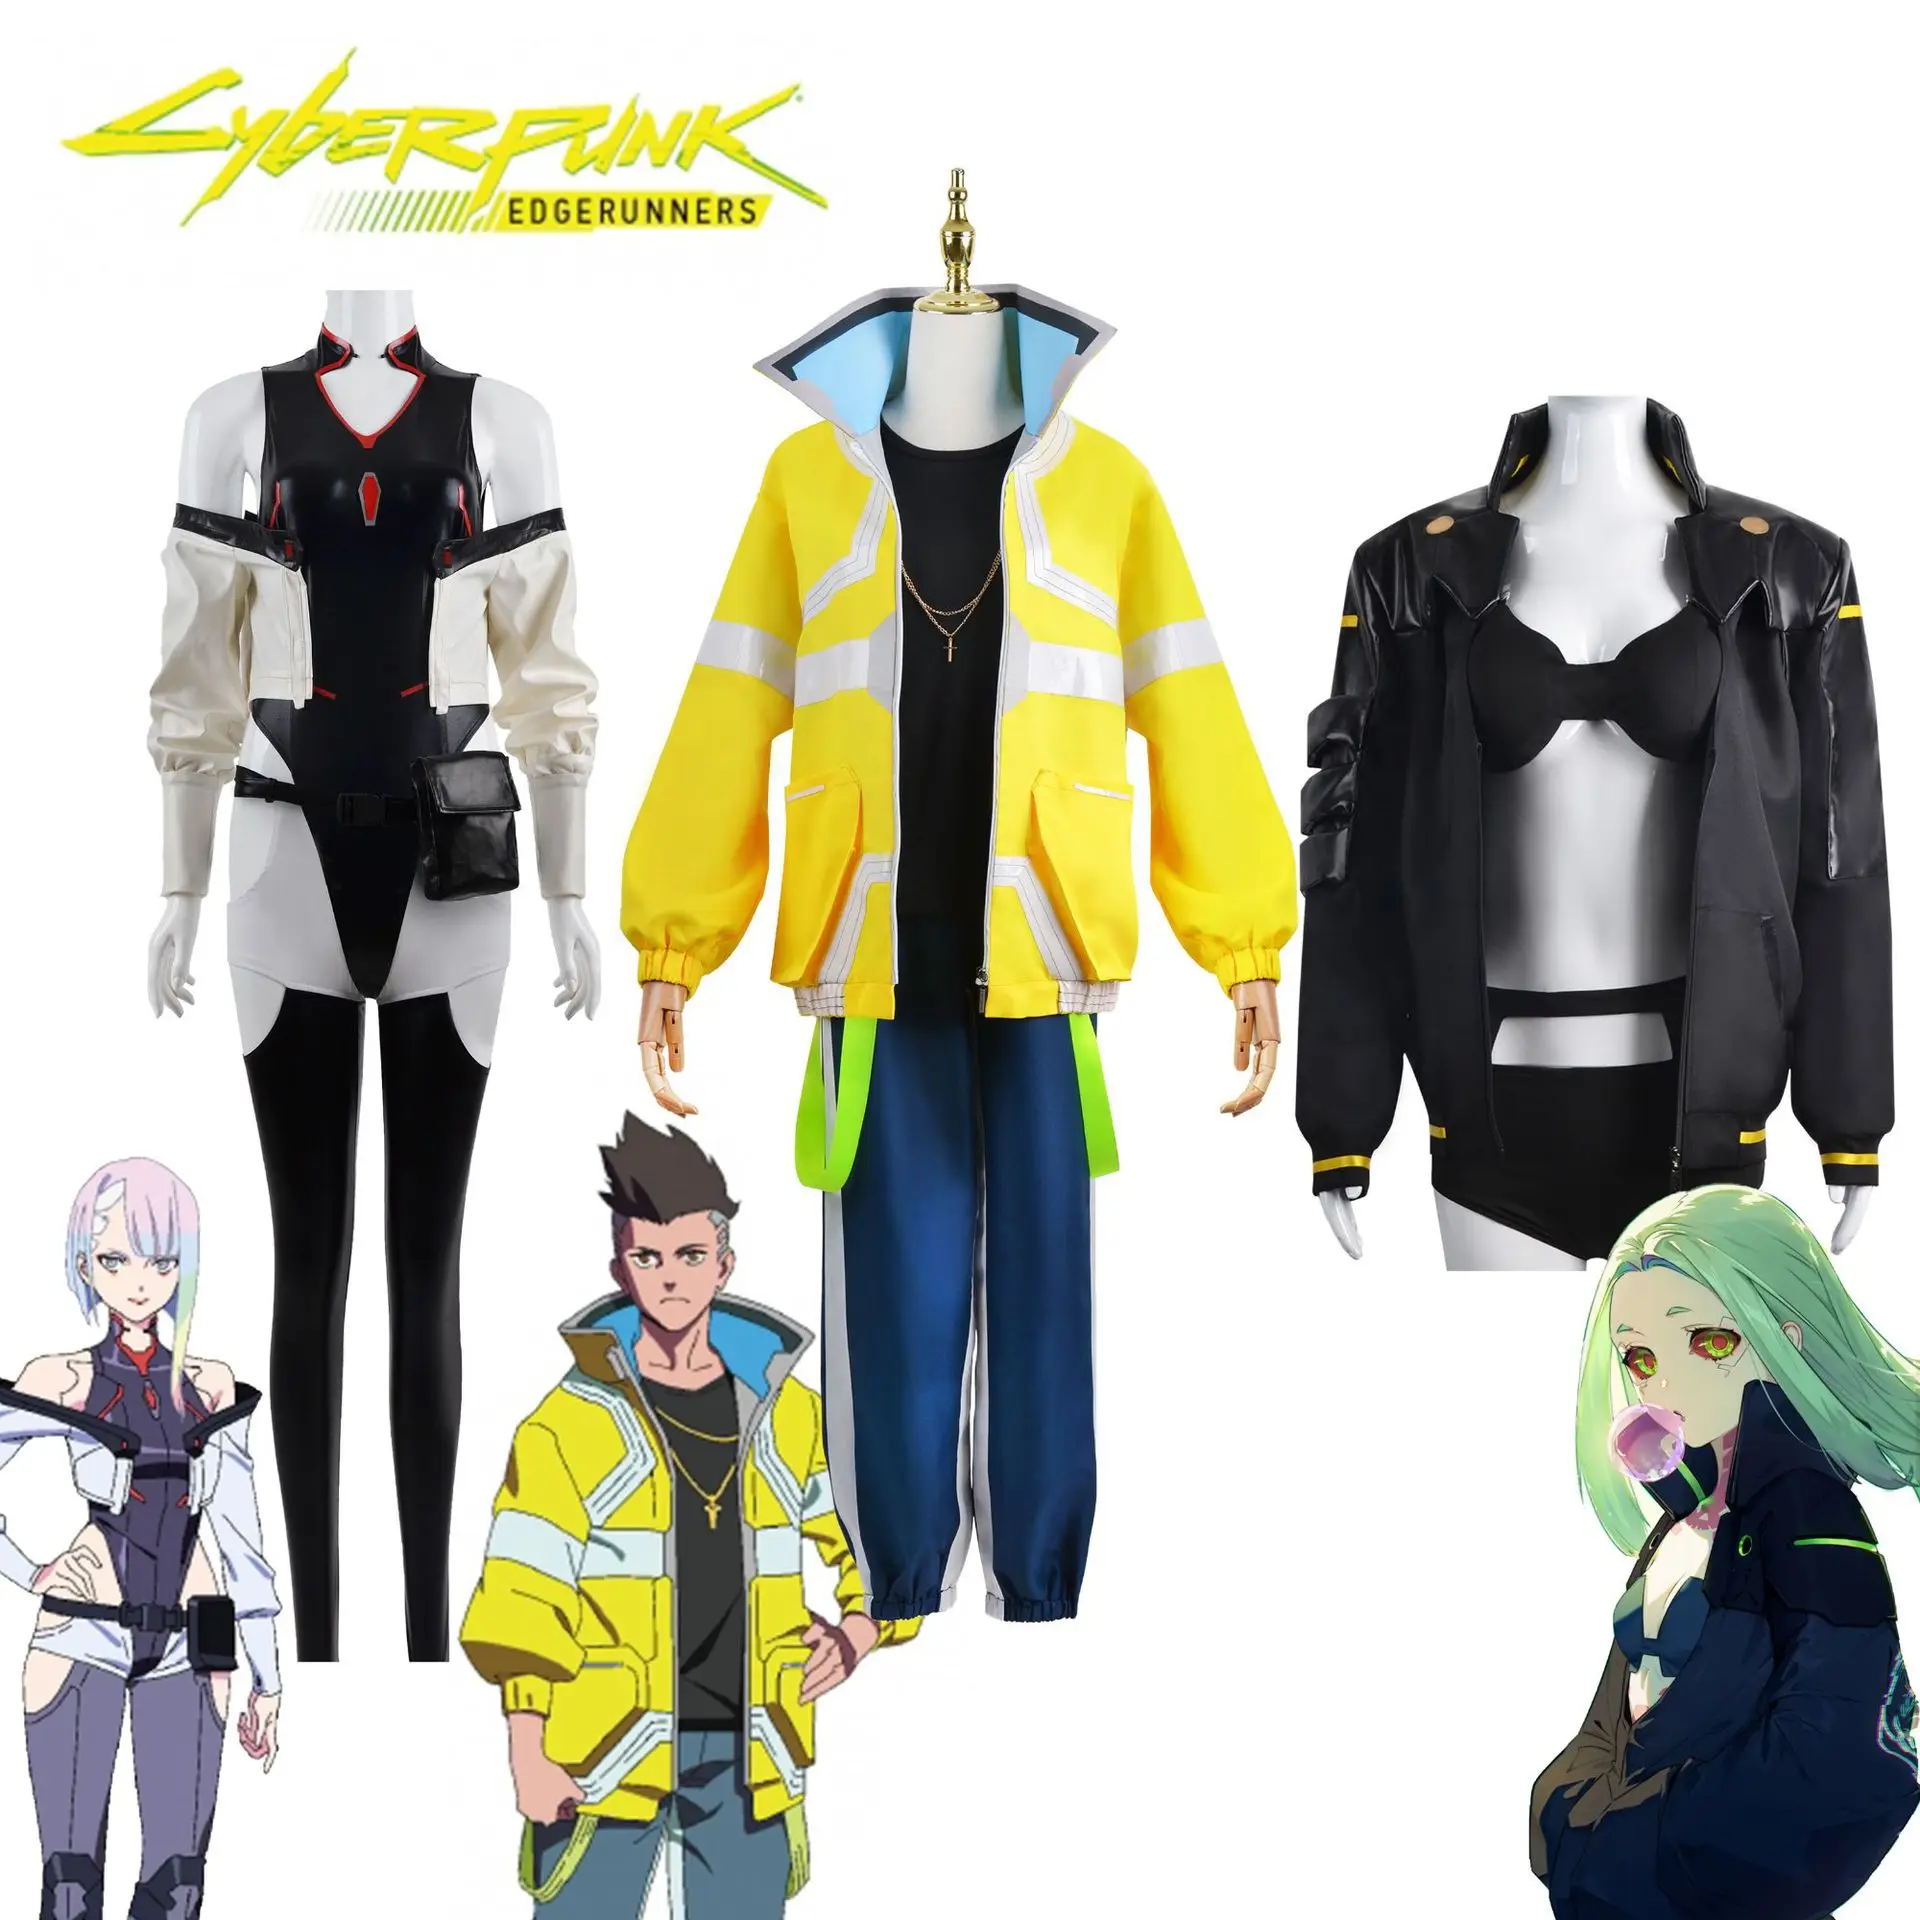 

Anime Rebecca Cyberpunk Edgerunners Cosplay Costumes Jacket Clothes Suit Halloween Carnival Costume for Girl Women